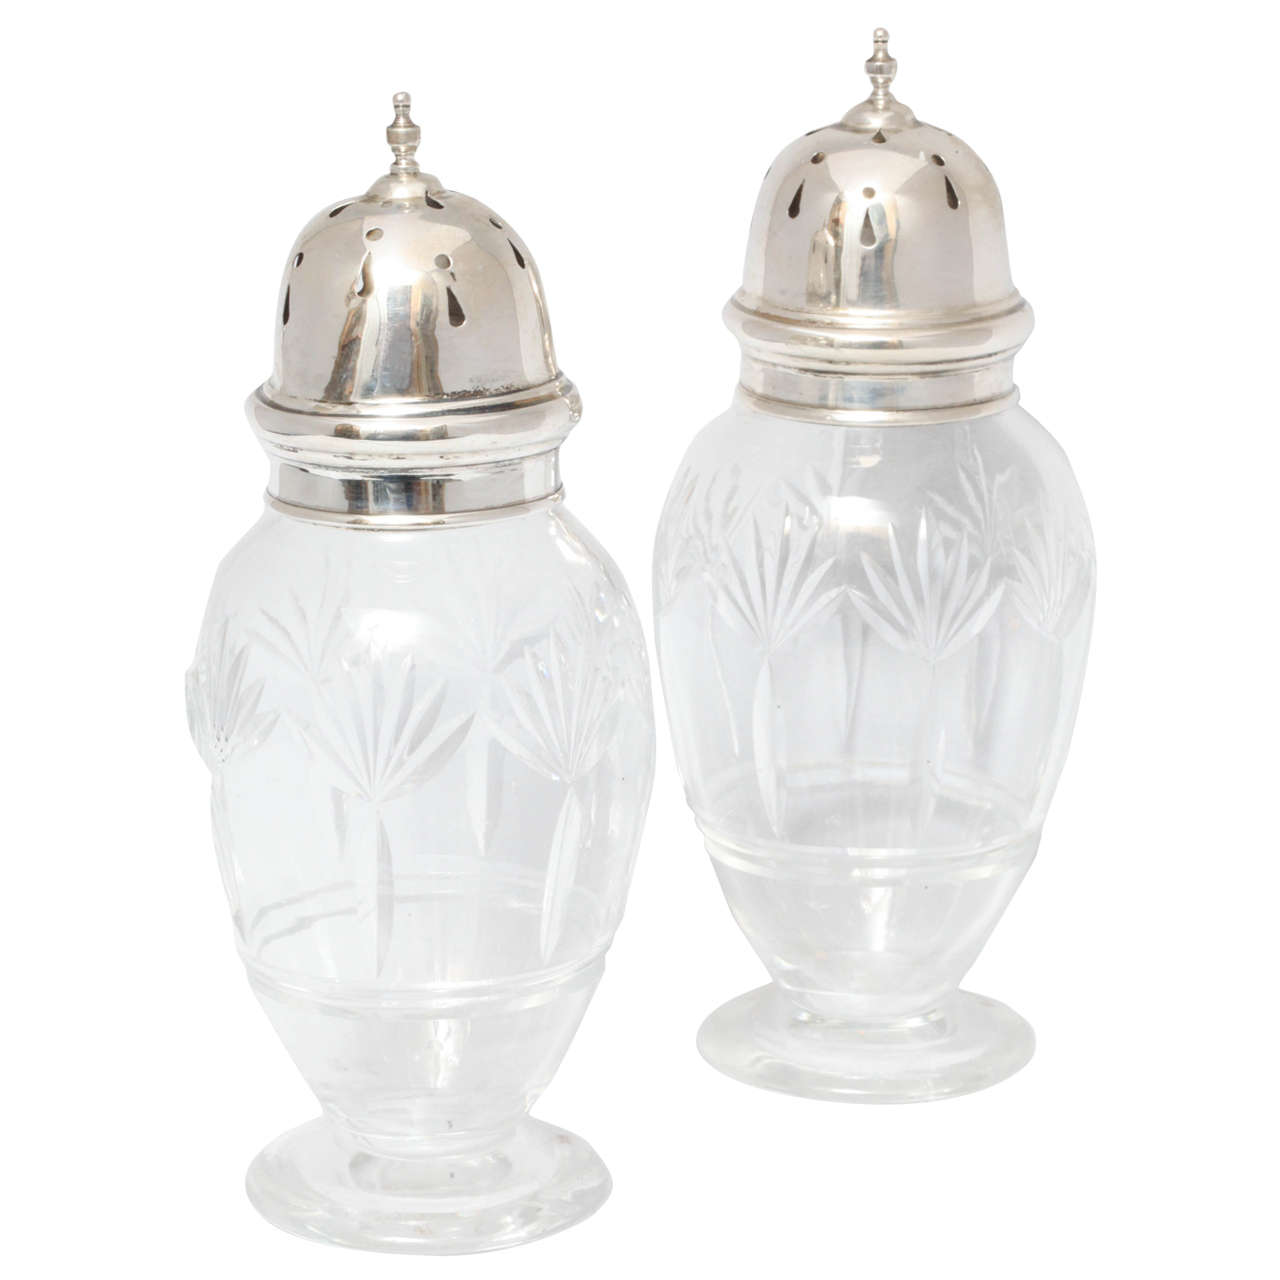 Edwardian Pair of Sterling Silver-Mounted Sugar Casters